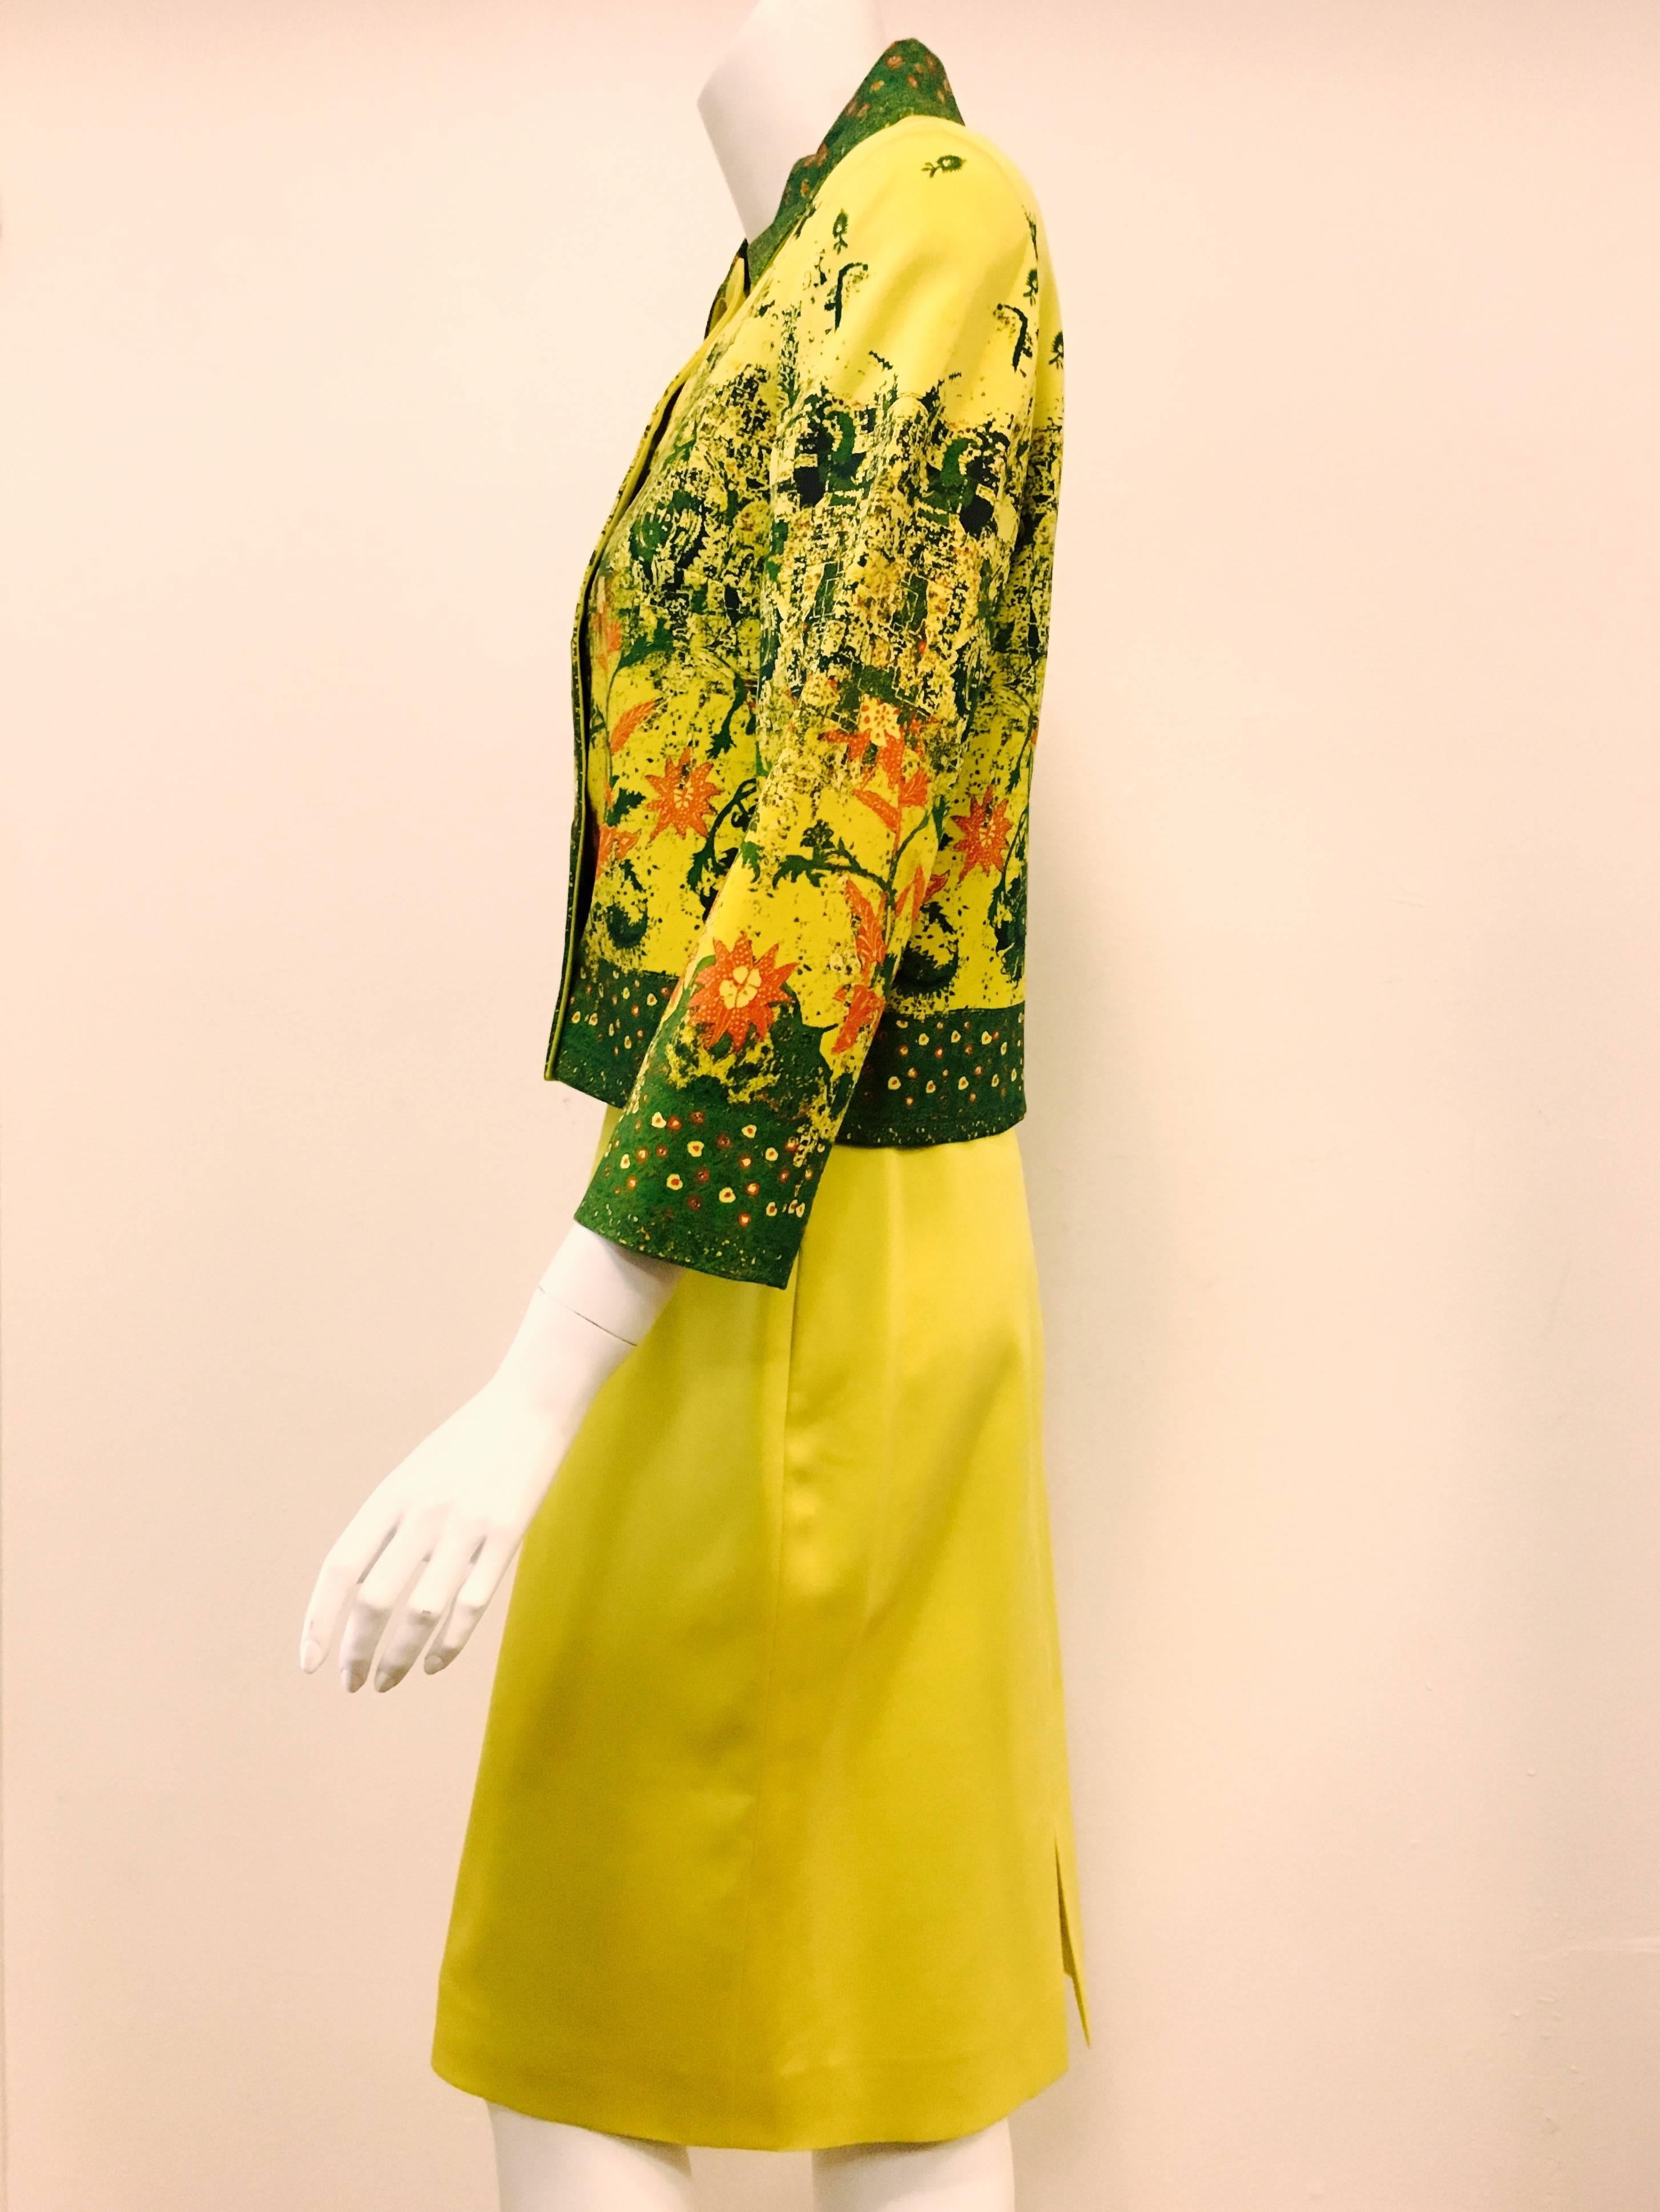 Women's Christian Lacroix Green and Citrus Yellow Skirt Suit With Hand Painted Skirt